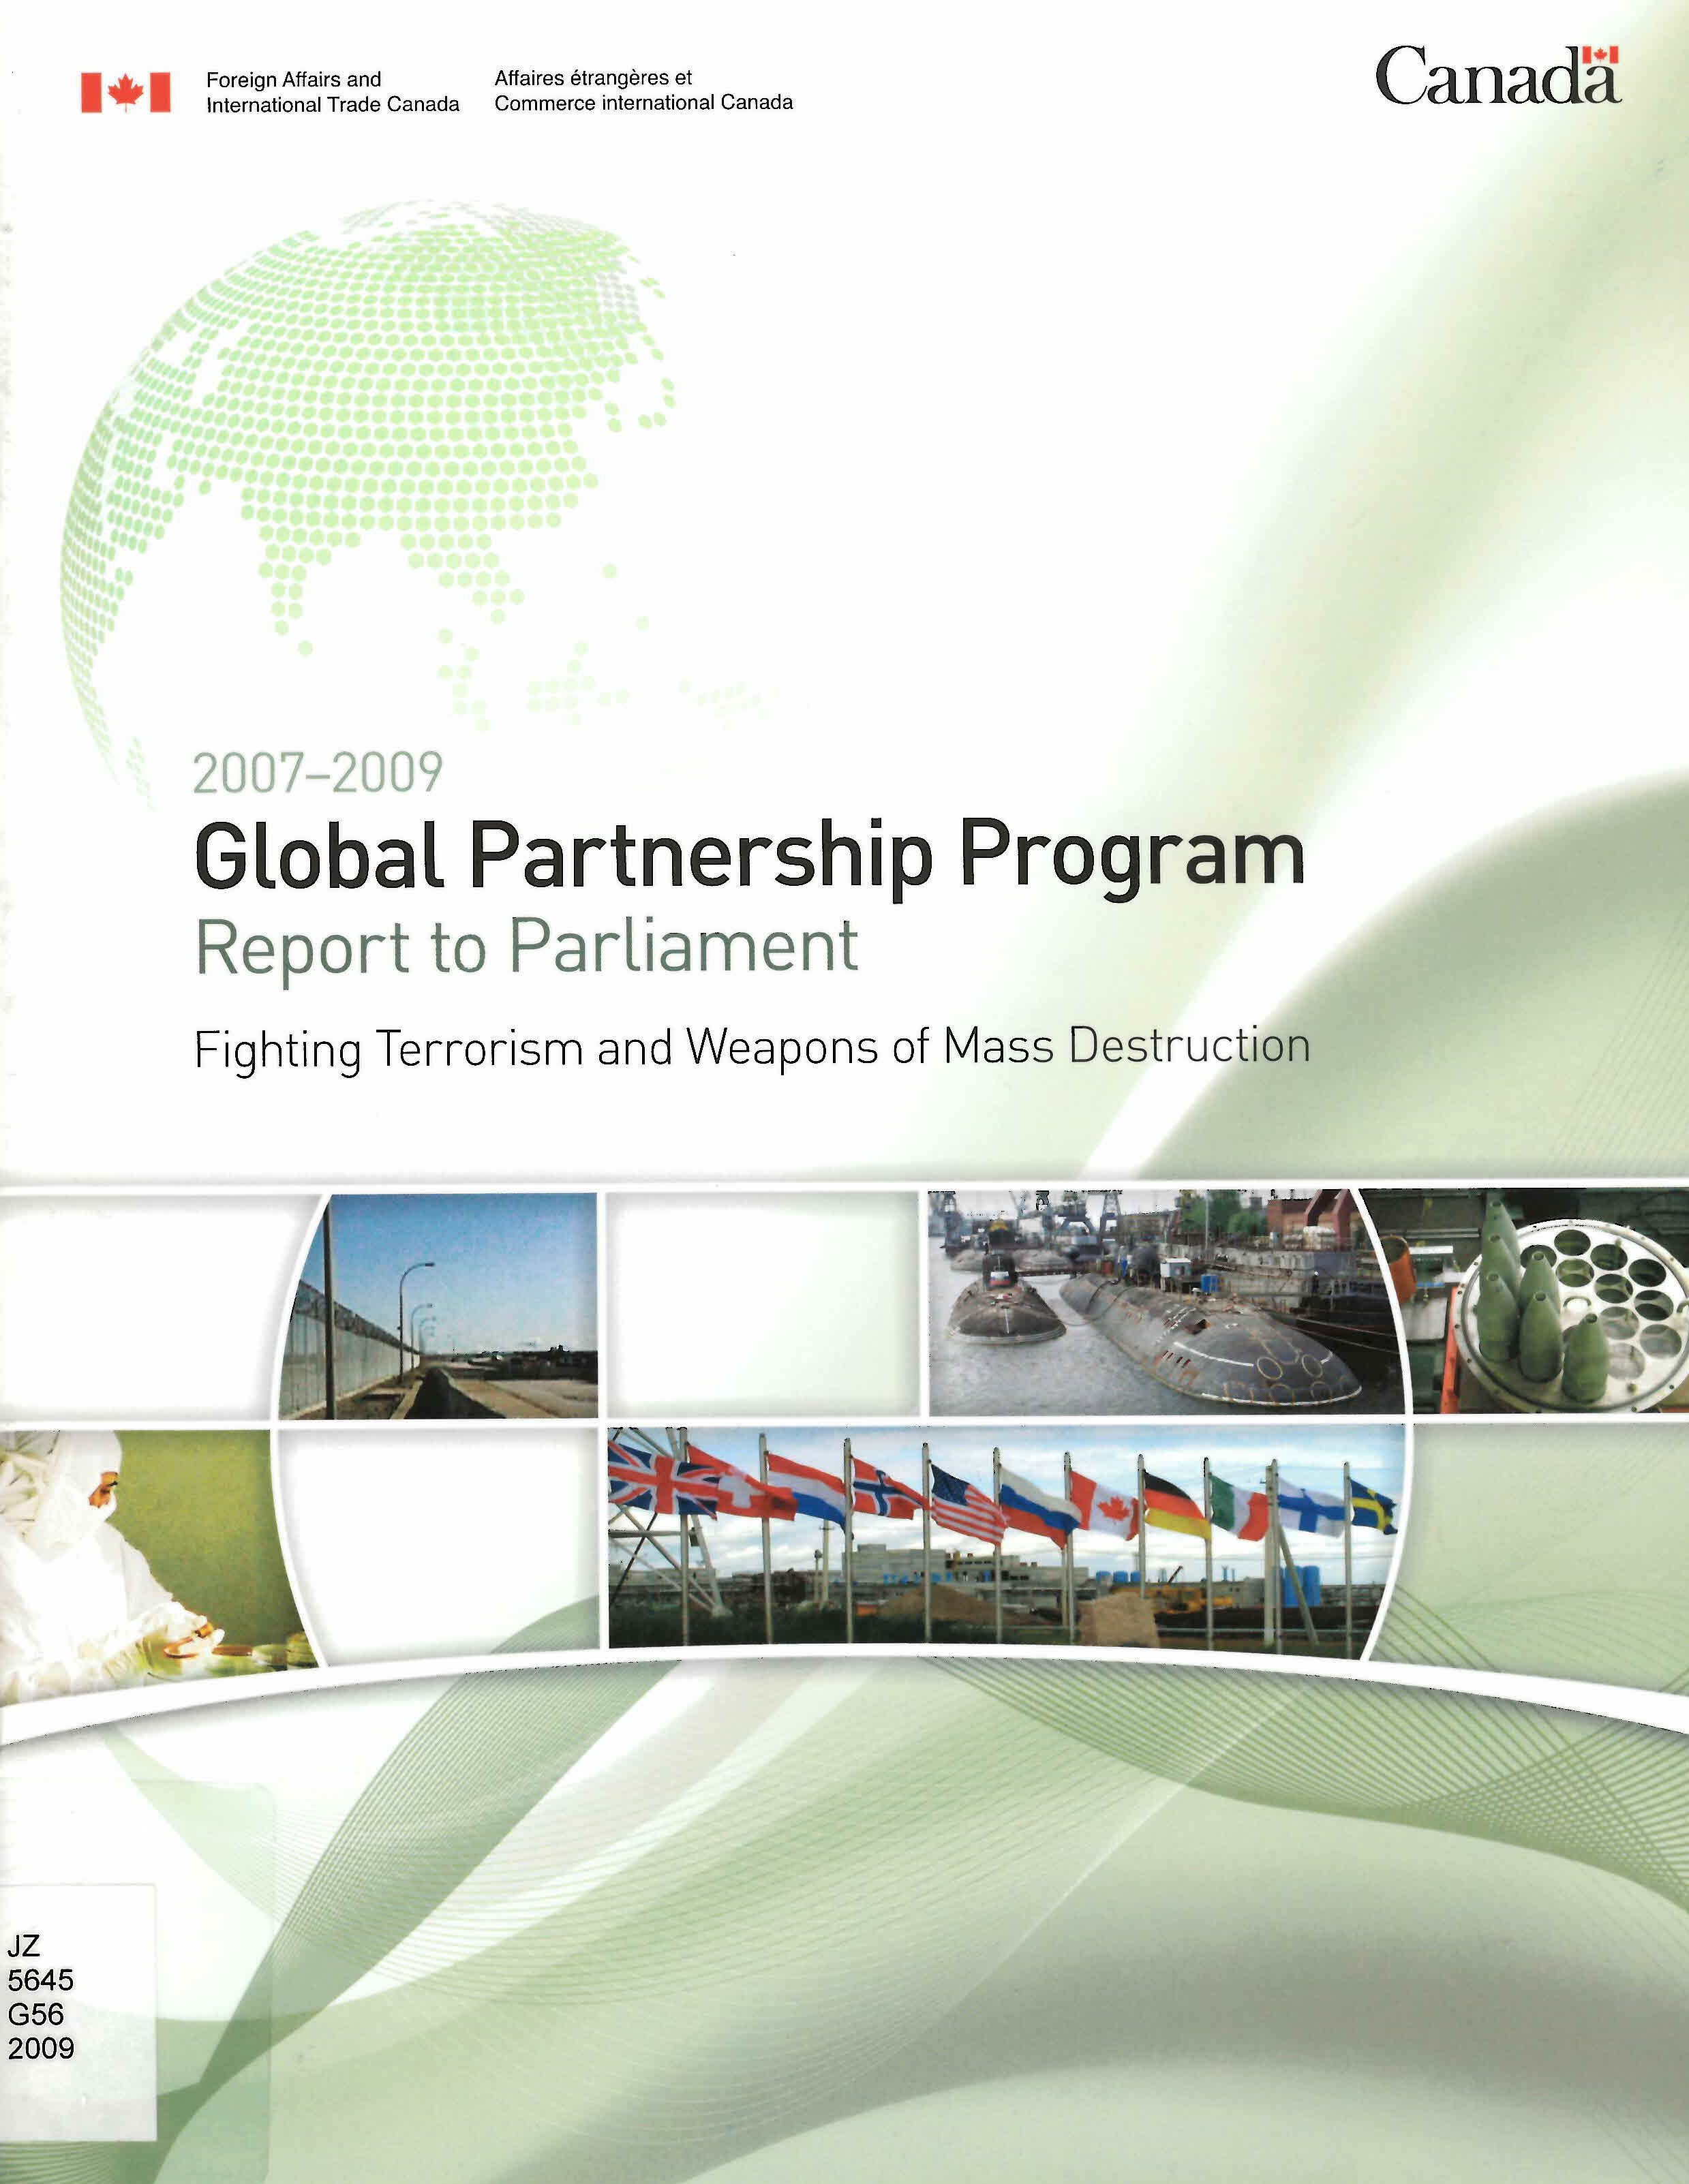 Global Partnership Program report to Parliament, 2007-2009 : fighting terrorism and weapons of mass destruction.